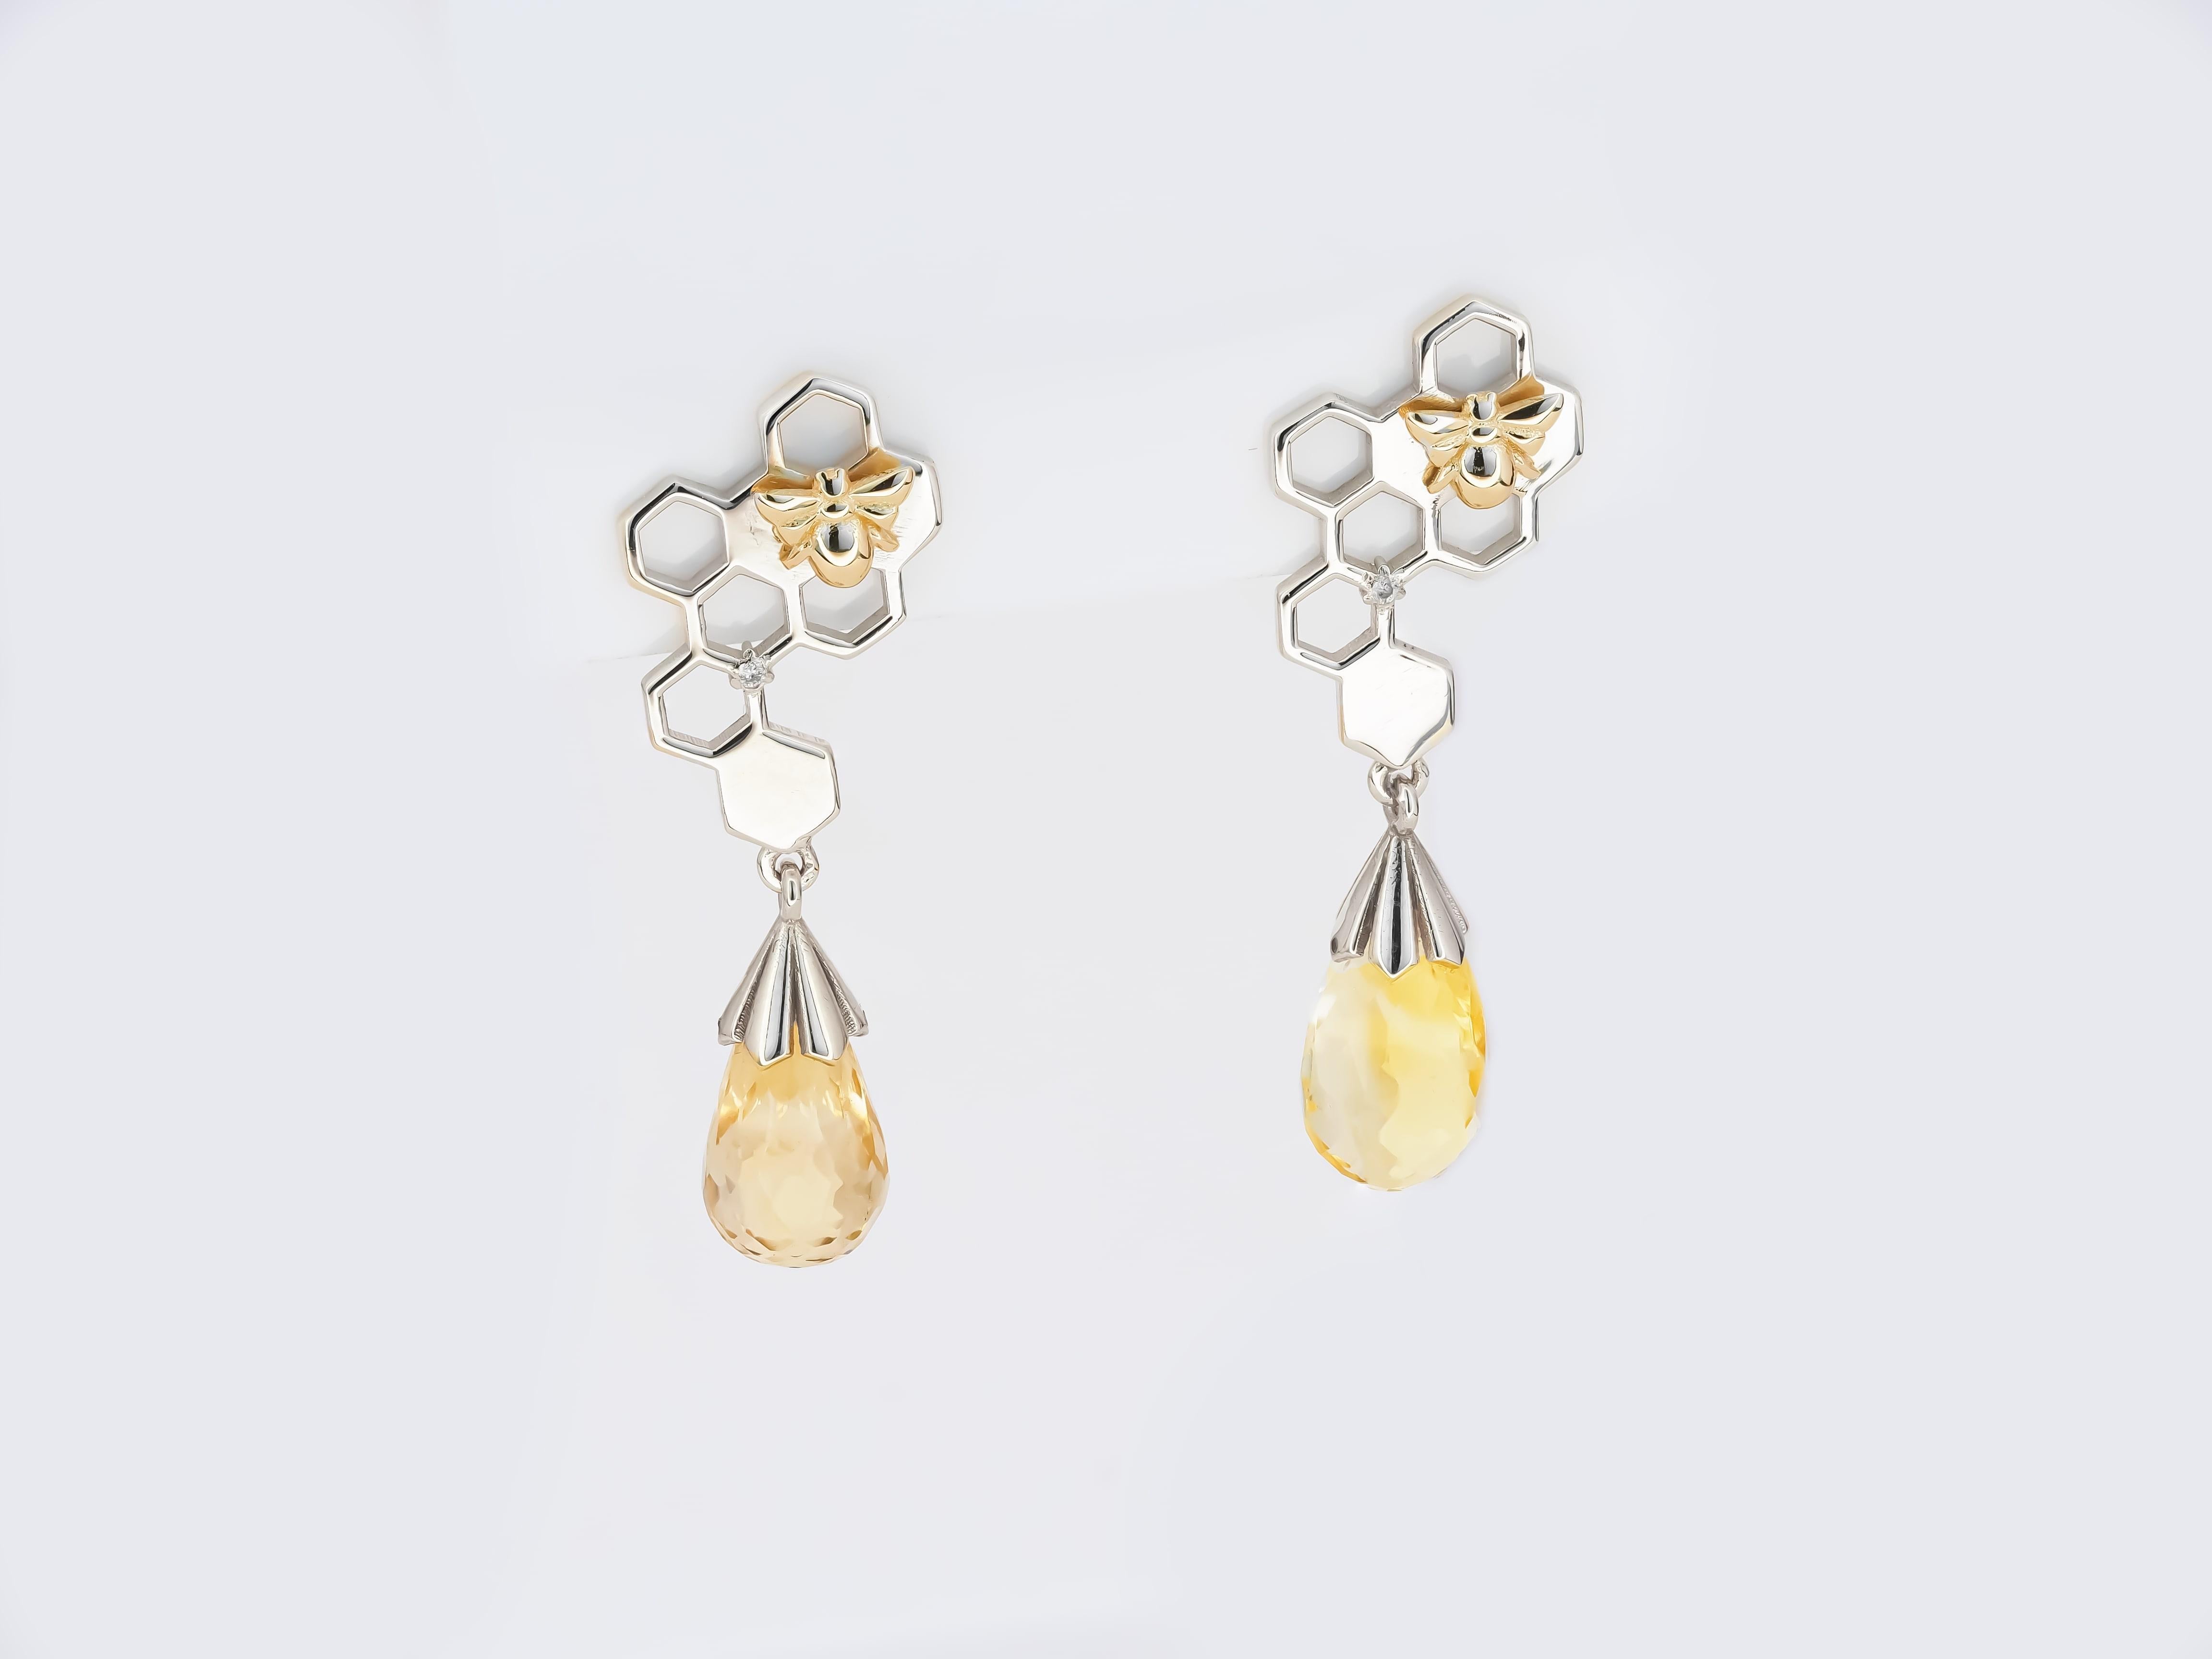 Bee on honeycomb 14 kt solid gold earrings studs with natural citrines briolettes. November birthstone.
Gold: white and yellow (bee) 14kt solid gold.
Earrings size: 33 x 11.3 mm.
Total Weight:  3 g. can be little different

Gemstones: Natural